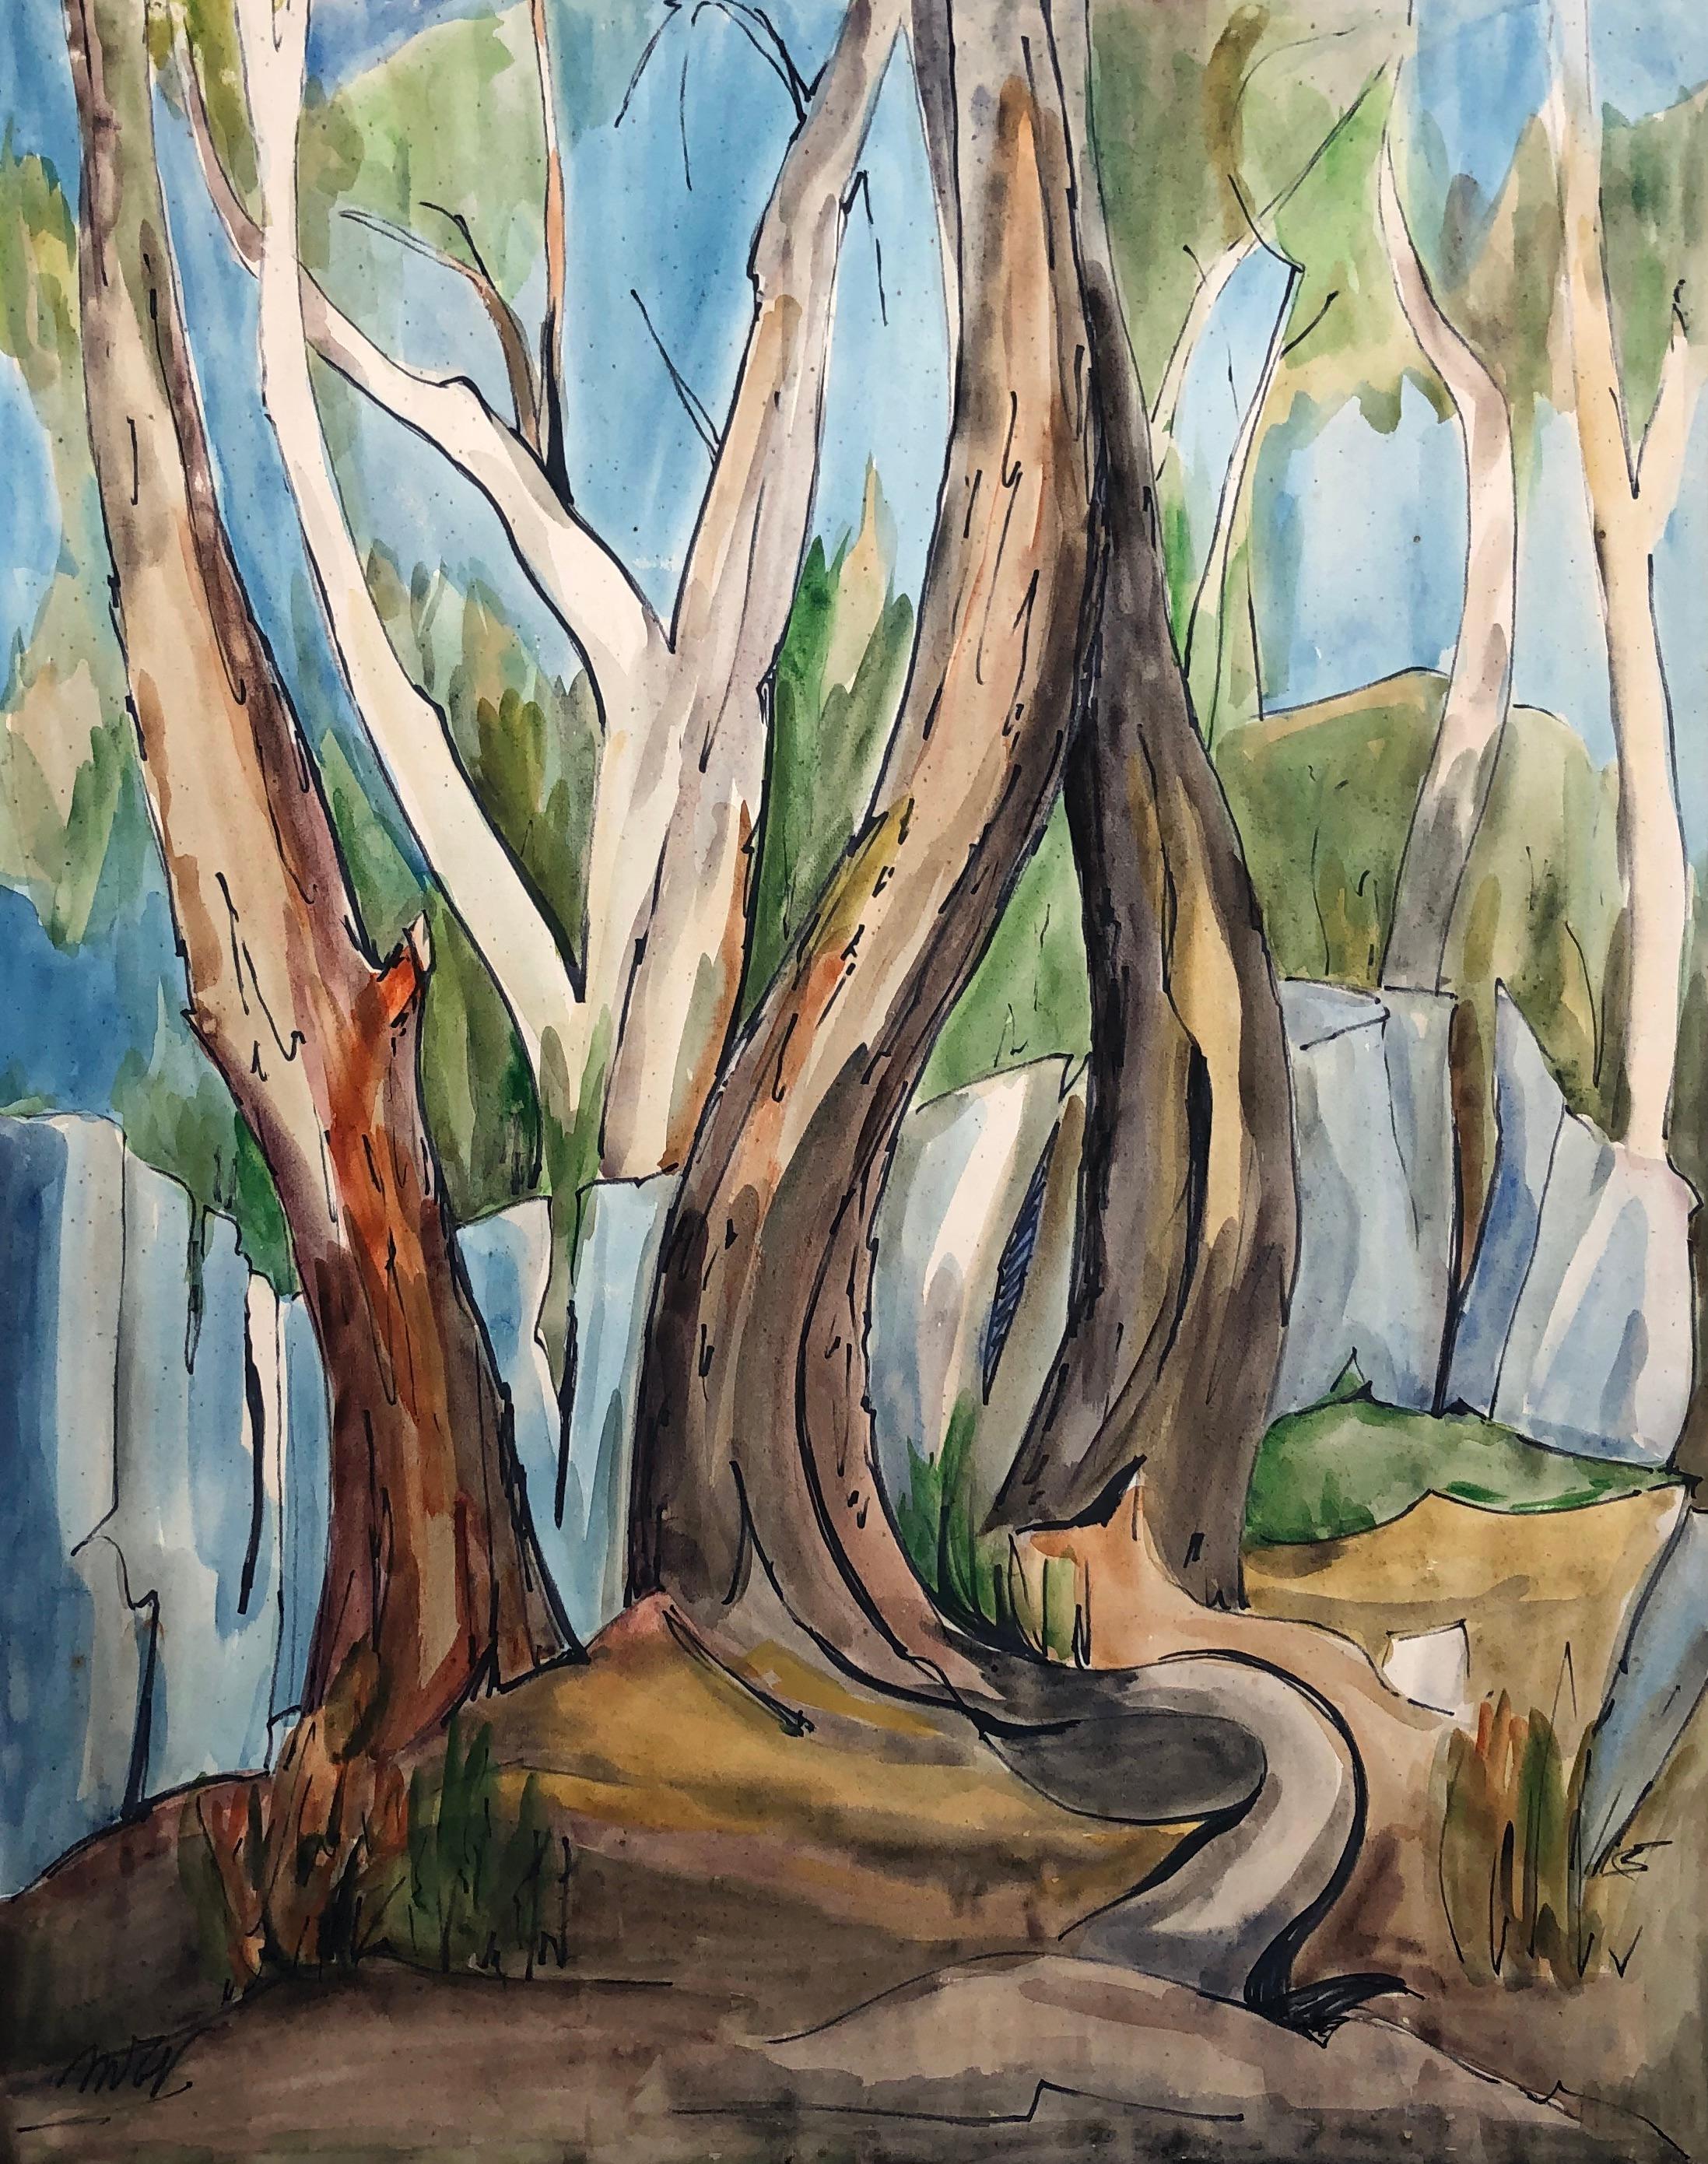 Unknown Landscape Art - Pines, Watercolor, Signature To Identify